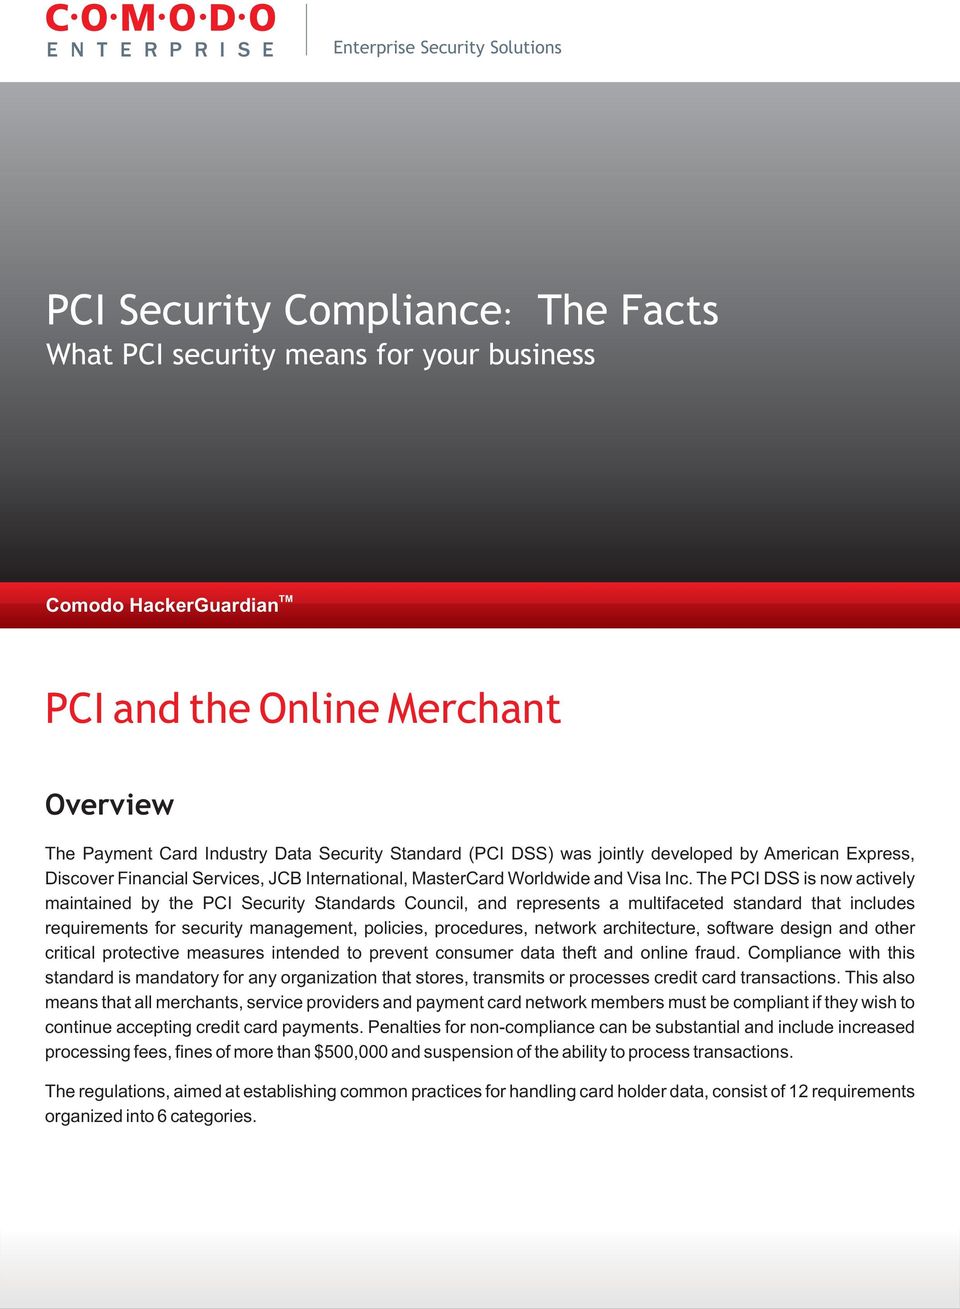 The PCI DSS is now actively maintained by the PCI Security Standards Council, and represents a multifaceted standard that includes requirements for security management, policies, procedures, network